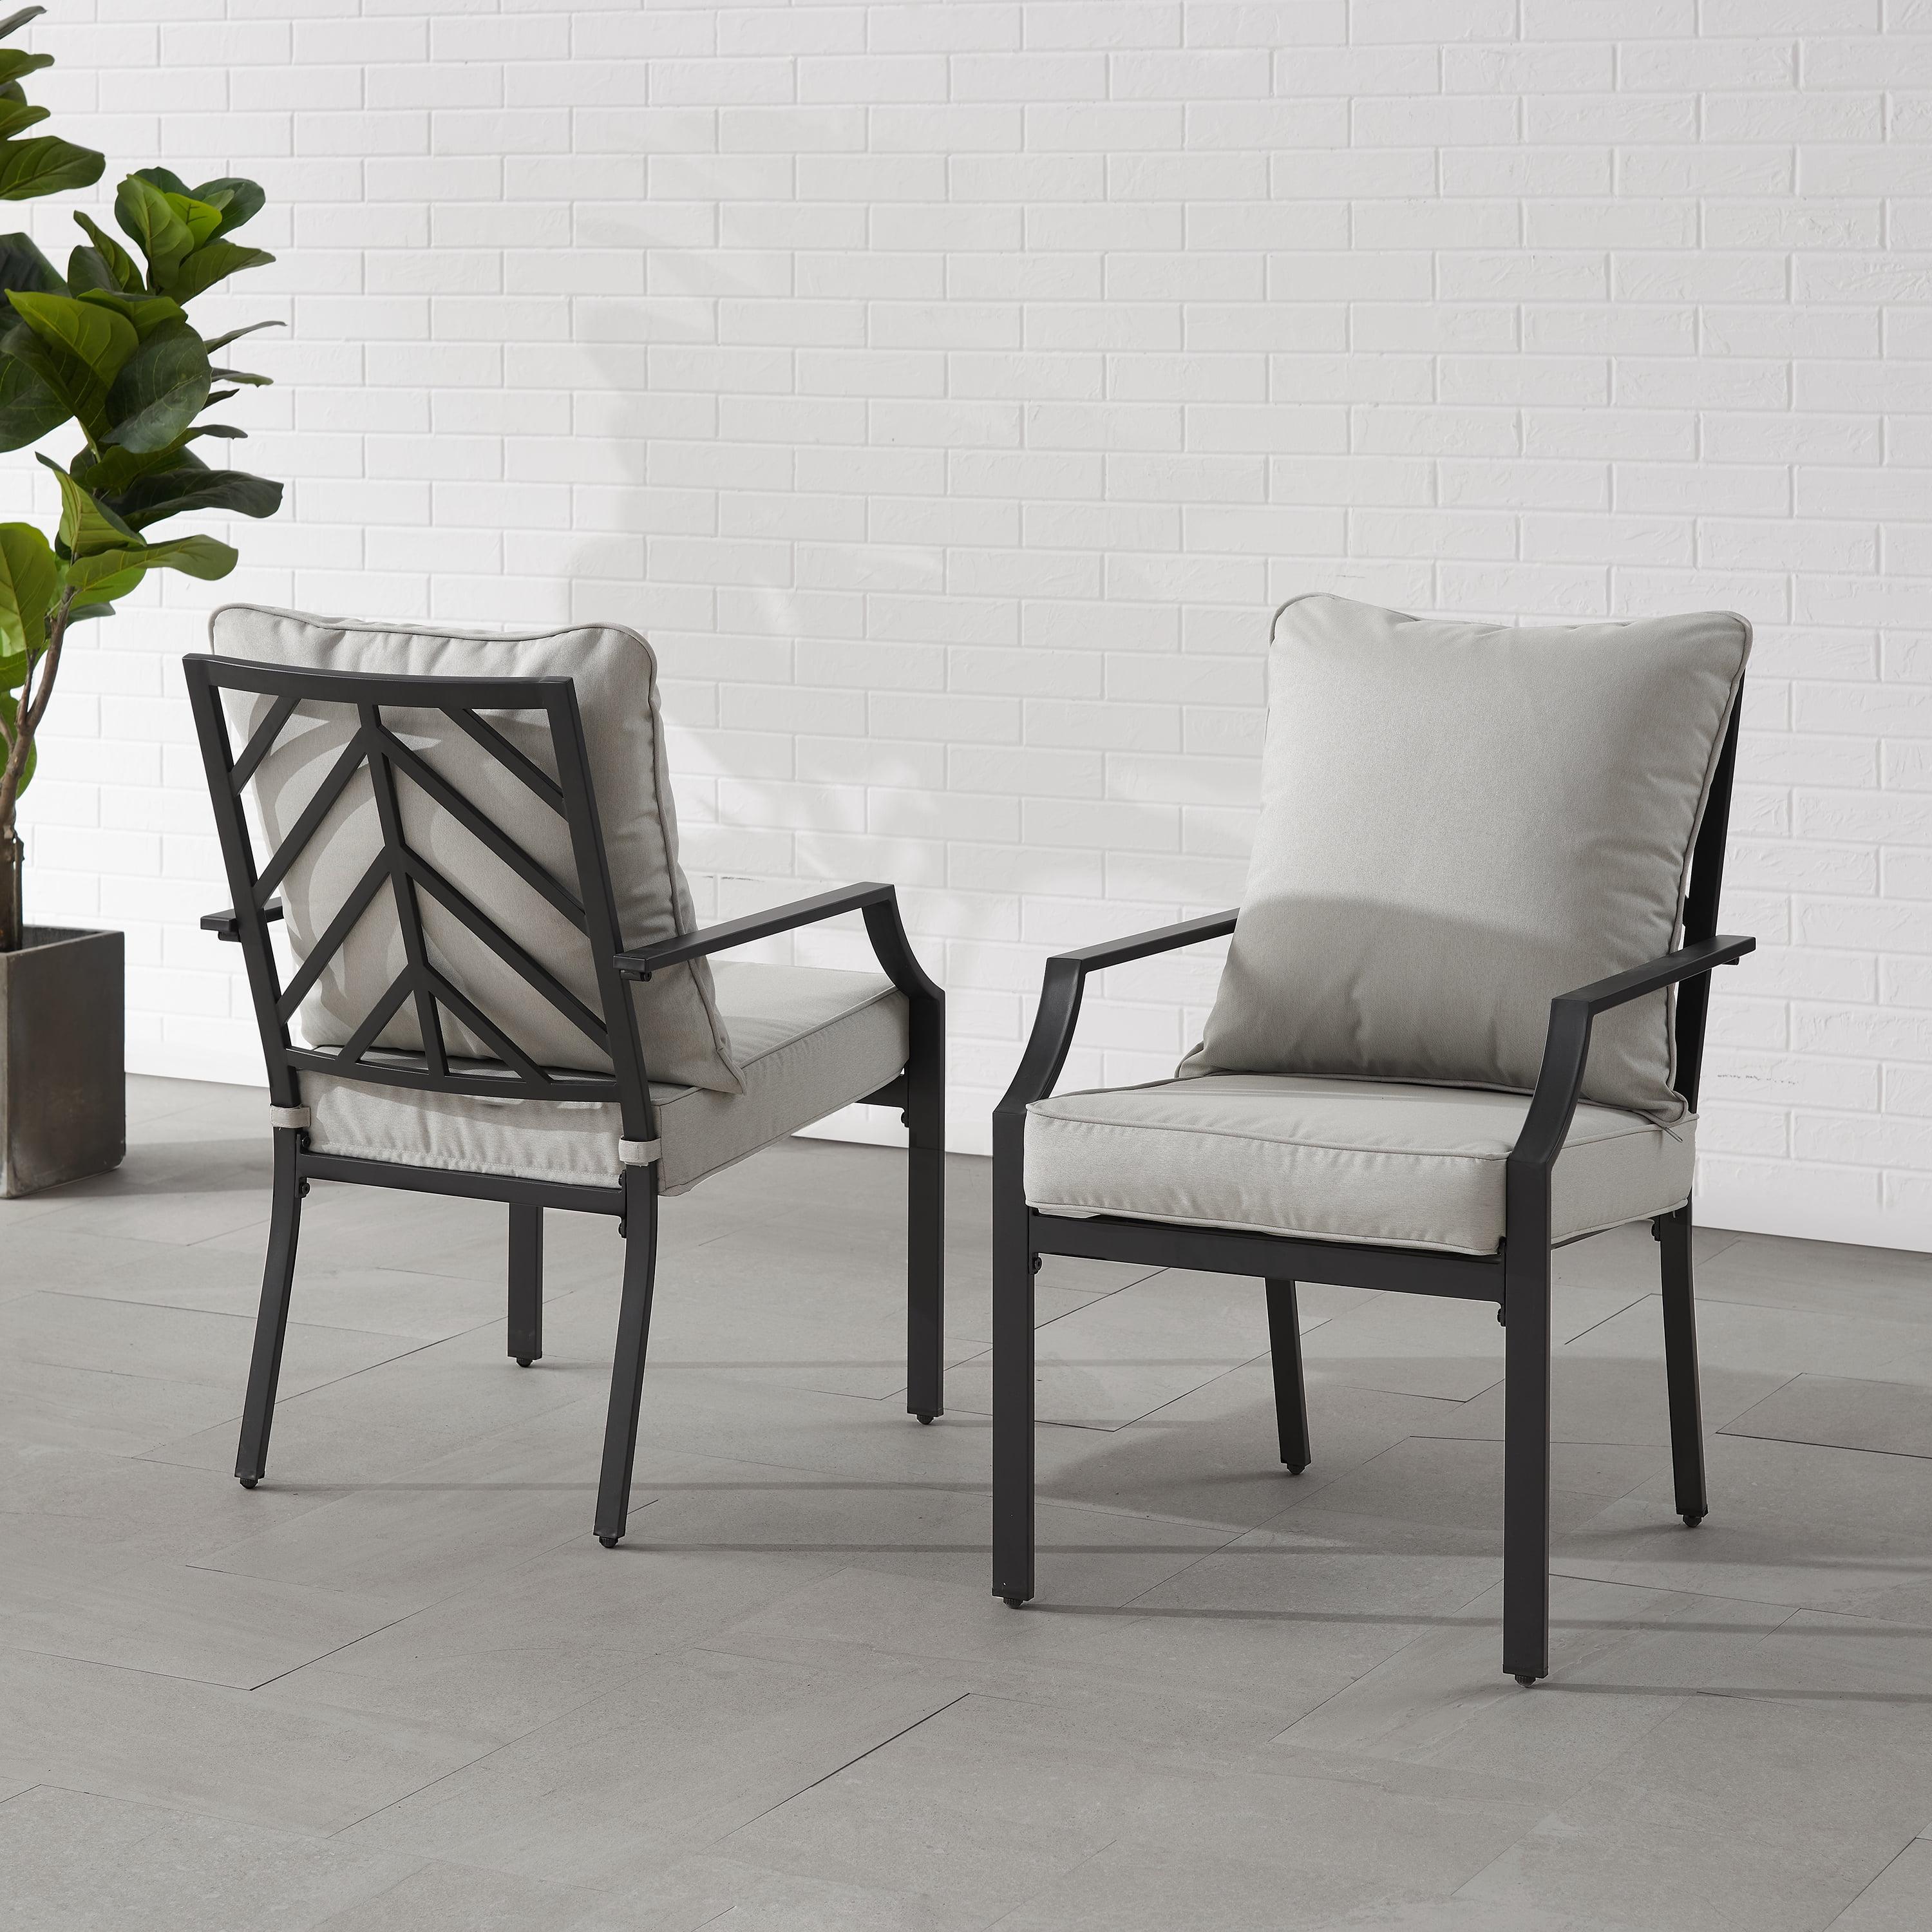 Otto 22.75" Gray and Matte Black Steel Outdoor Dining Chair with Cushions